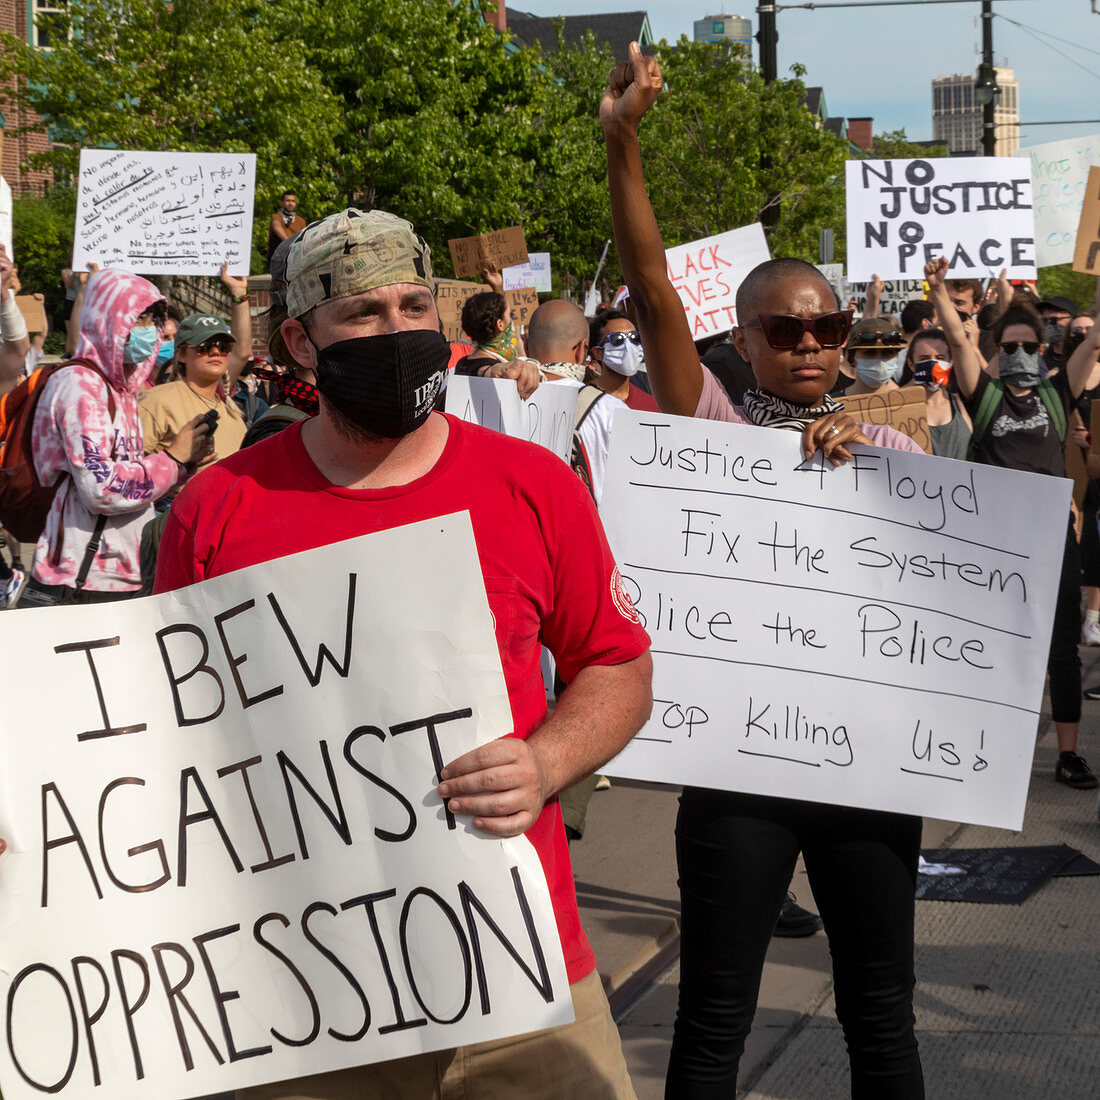 Rally against police brutality, Detroit, USA